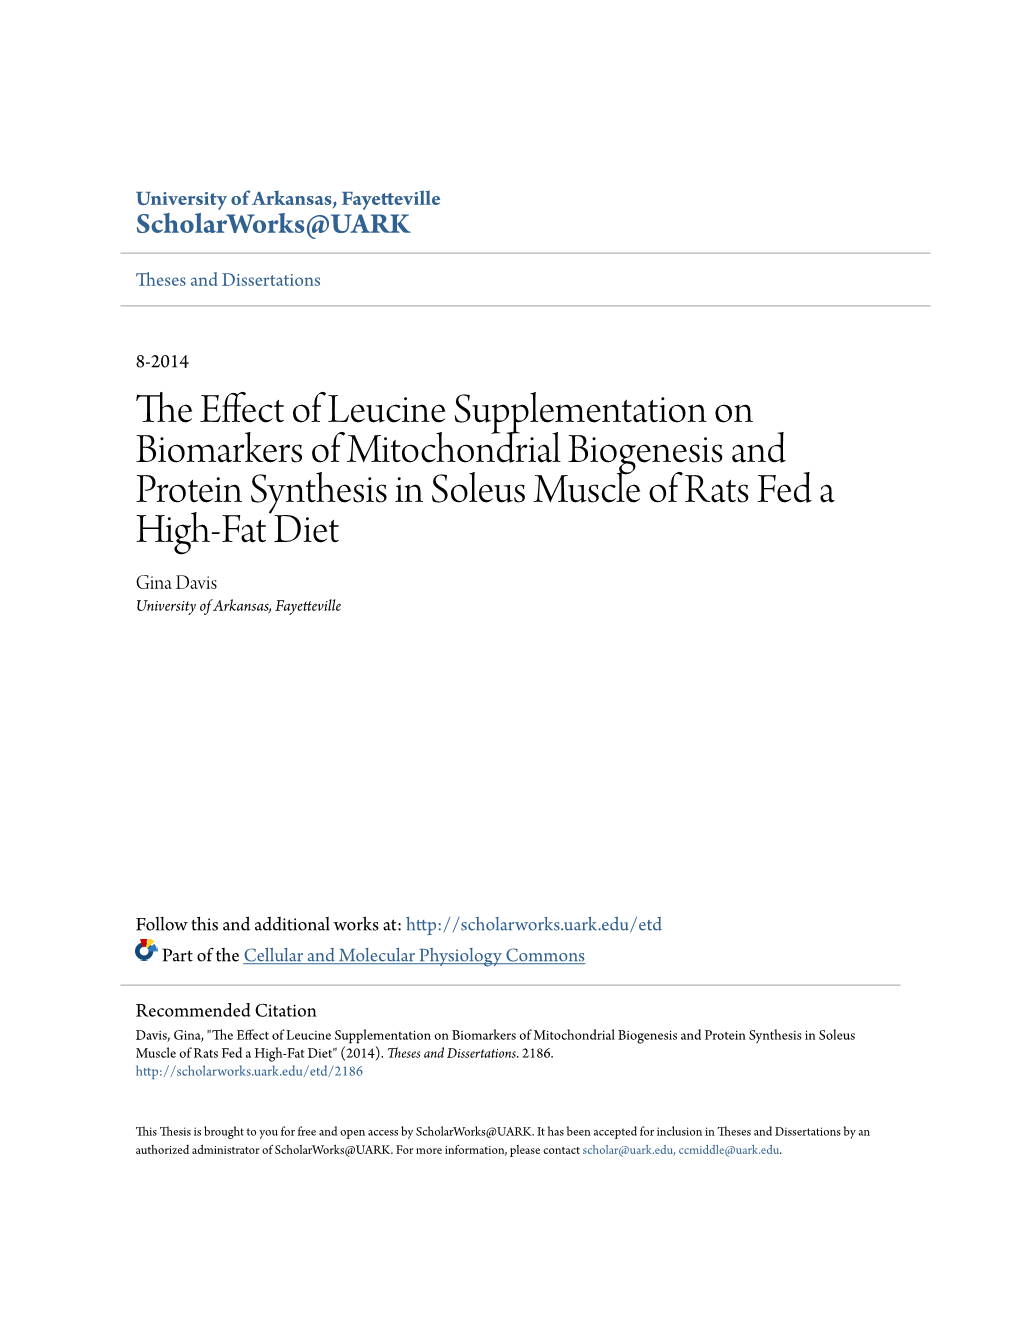 The Effect of Leucine Supplementation on Biomarkers of Mitochondrial Biogenesis and Protein Synthesis in Soleus Muscle of Rats Fed a High-Fat Diet" (2014)